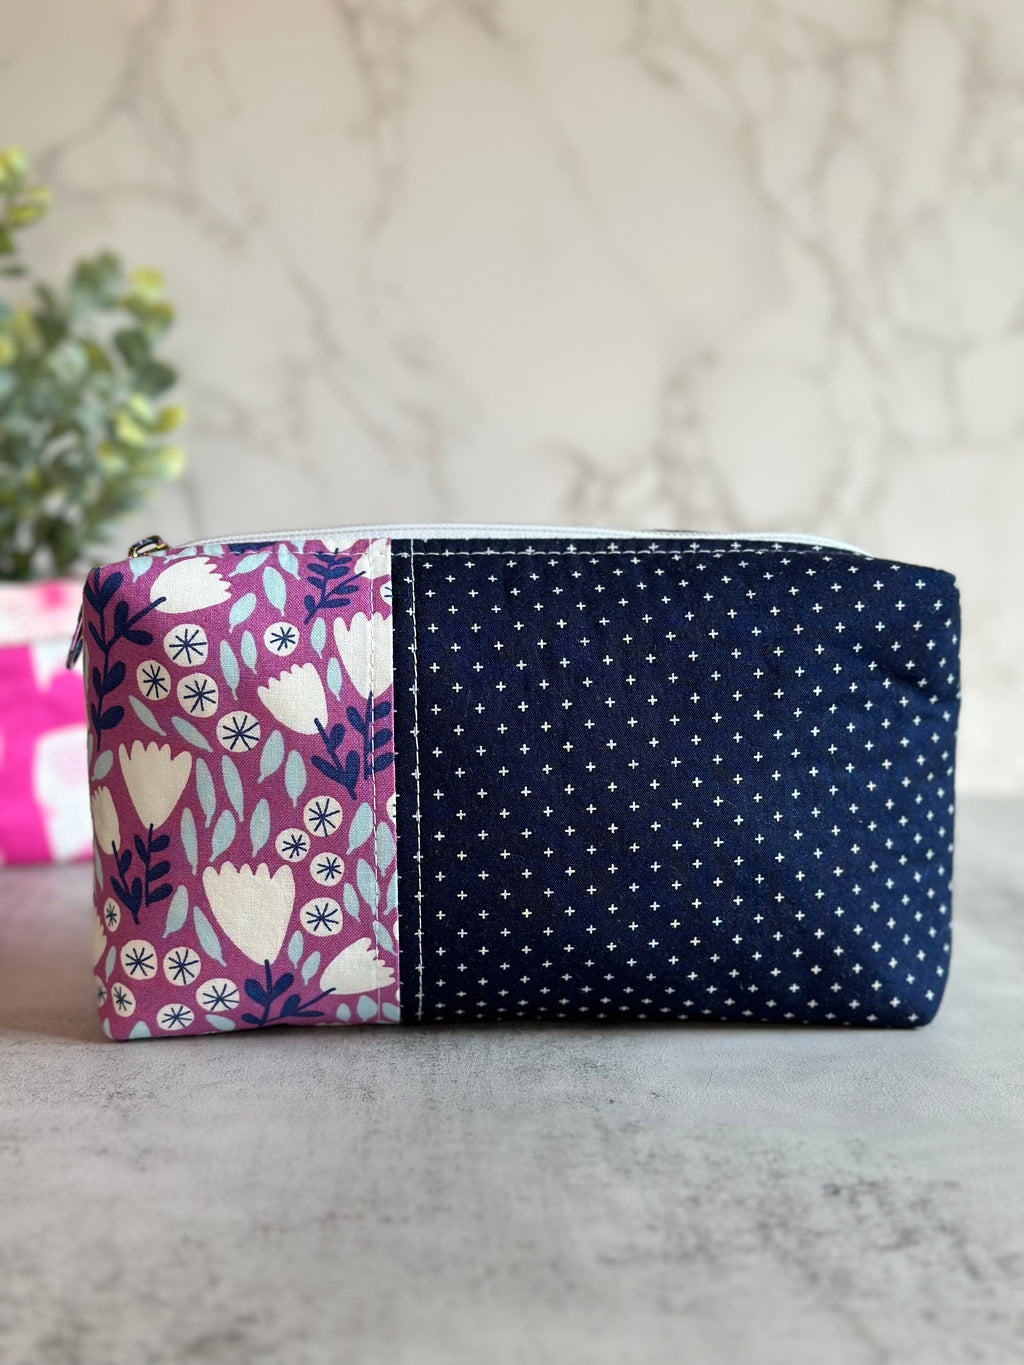 Boxy Pouch - Heart to Heart (Cotton+Steel)